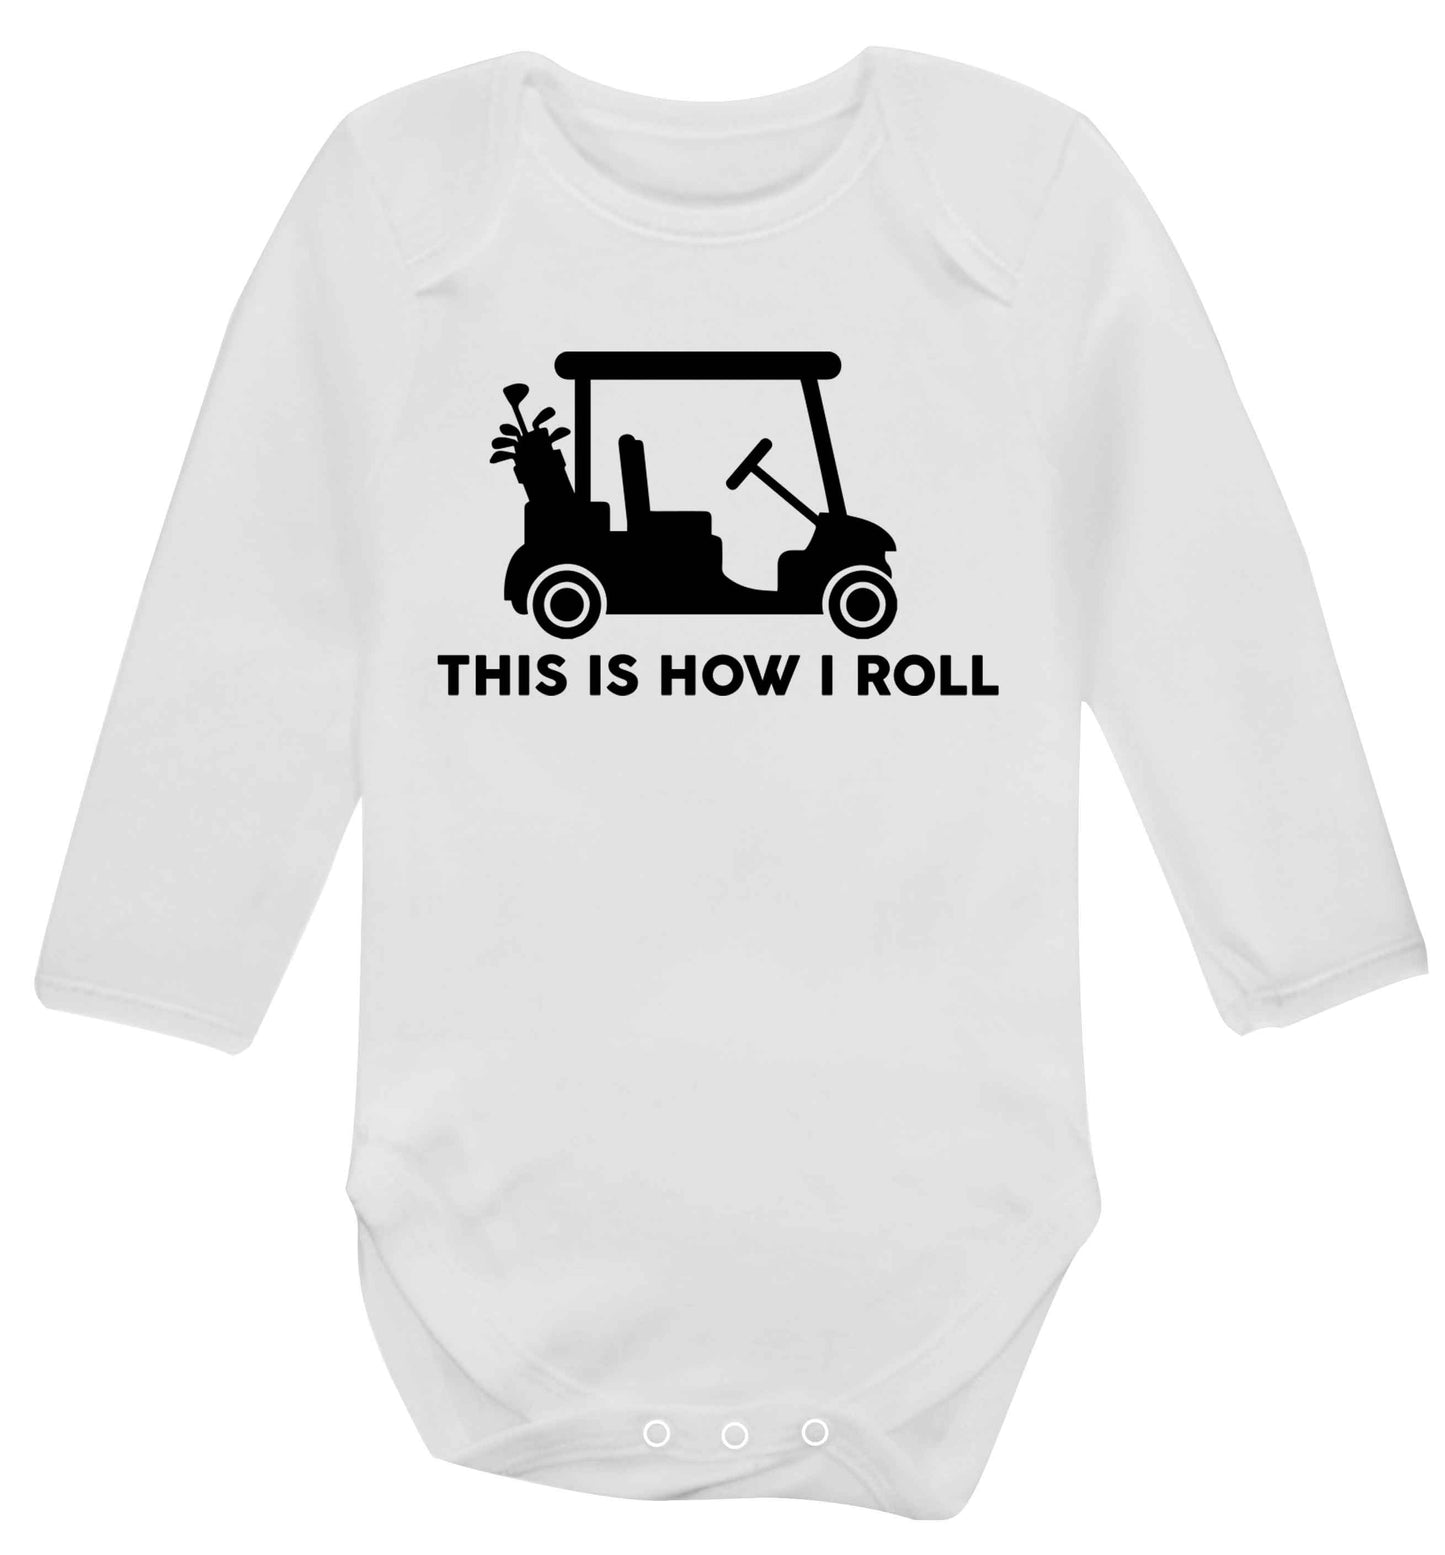 This is how I roll golf cart Baby Vest long sleeved white 6-12 months